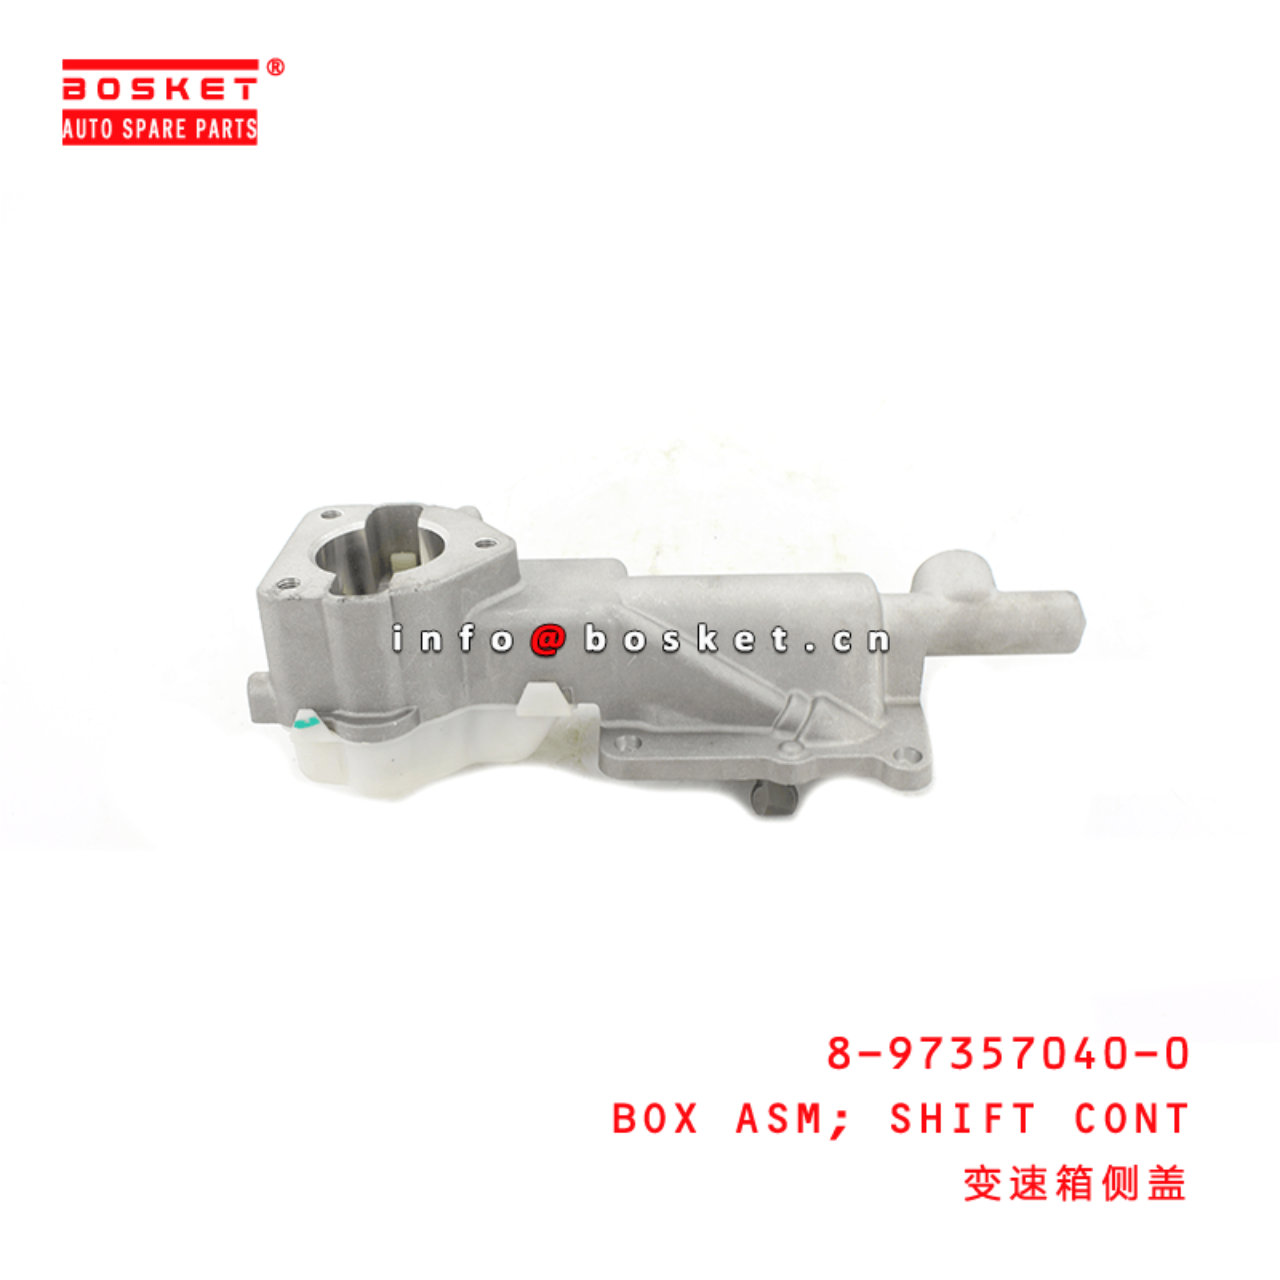 8-97357040-0 Shift Control Box Assembly Suitable for ISUZU MUX D-MAX 8973570400